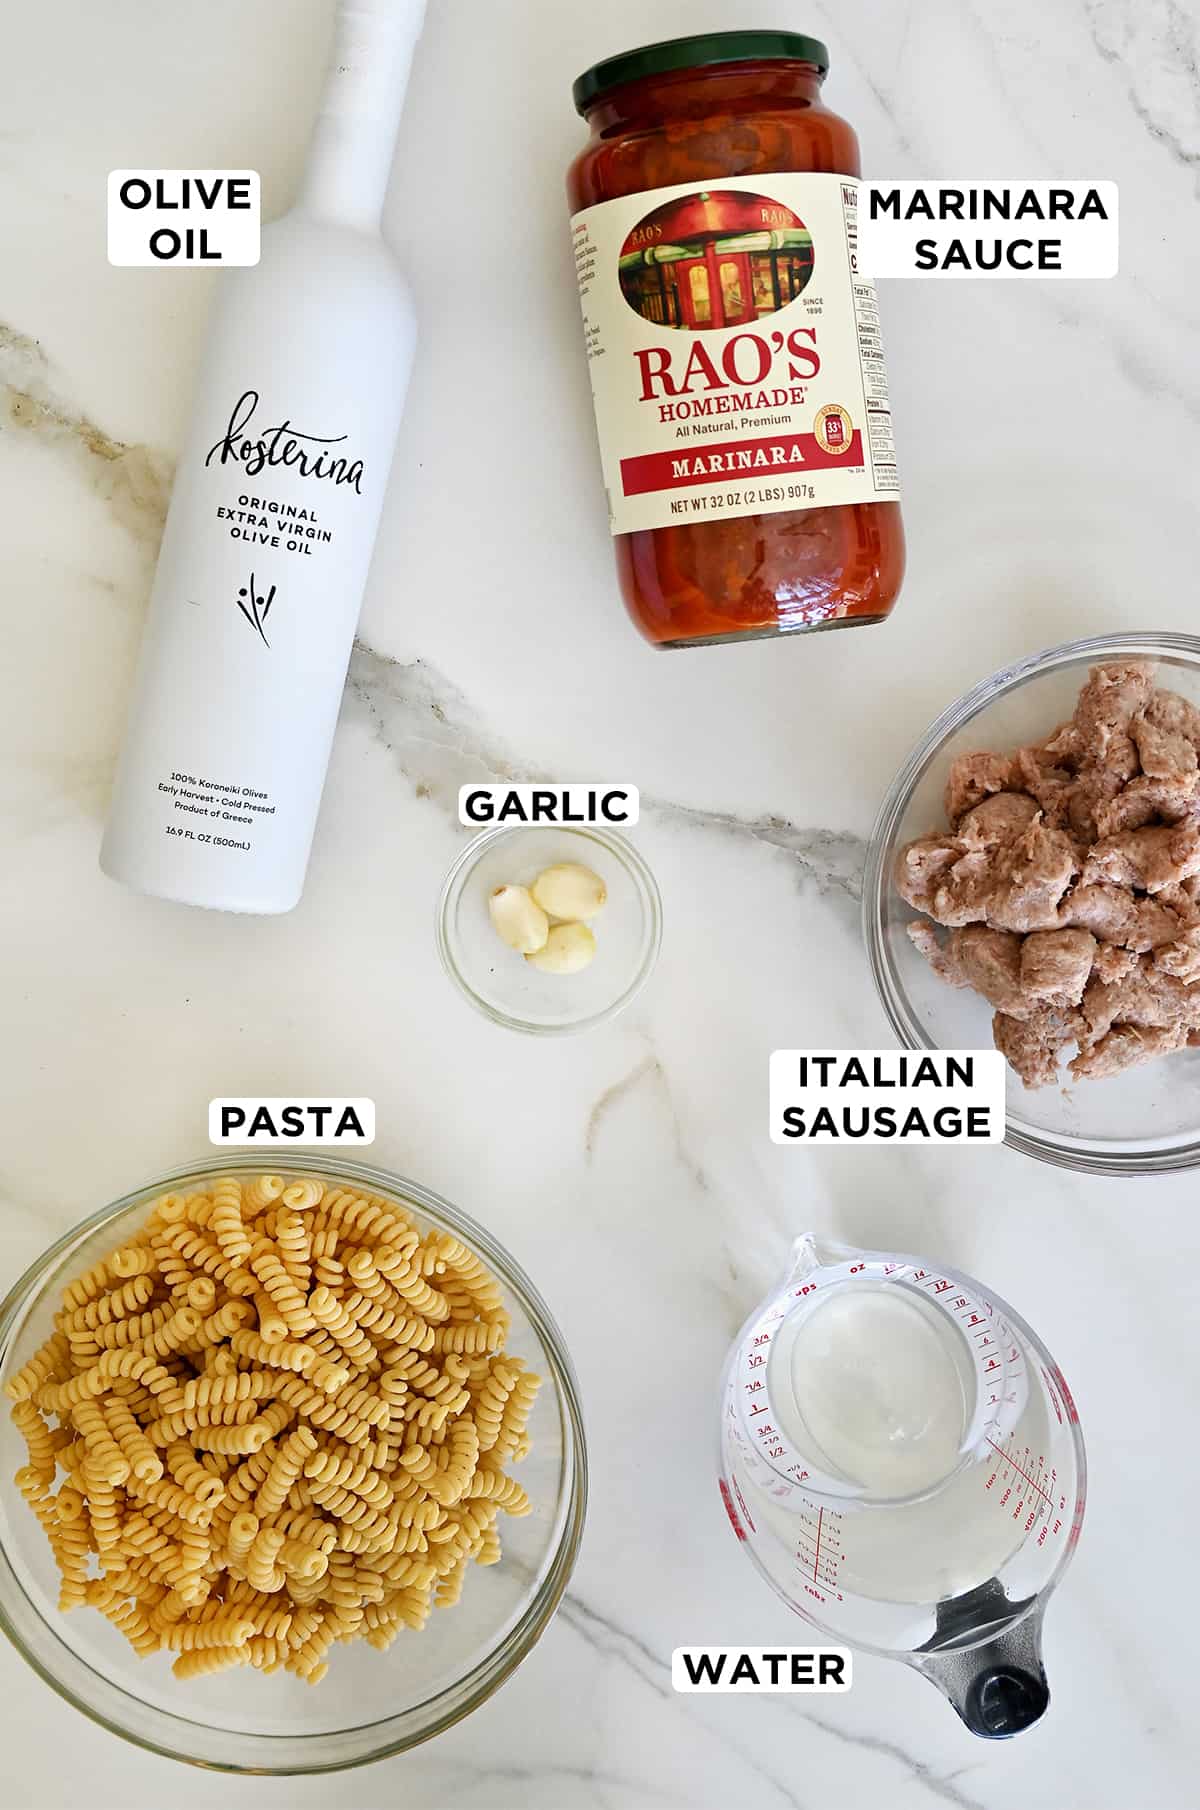 A bottle of olive oil next to a jar of marinara sauce, Italian sausage in a clear bowl, a measuring cup containing water, a clear bowl containing uncooked pasta and a small clear bowl containing minced garlic.